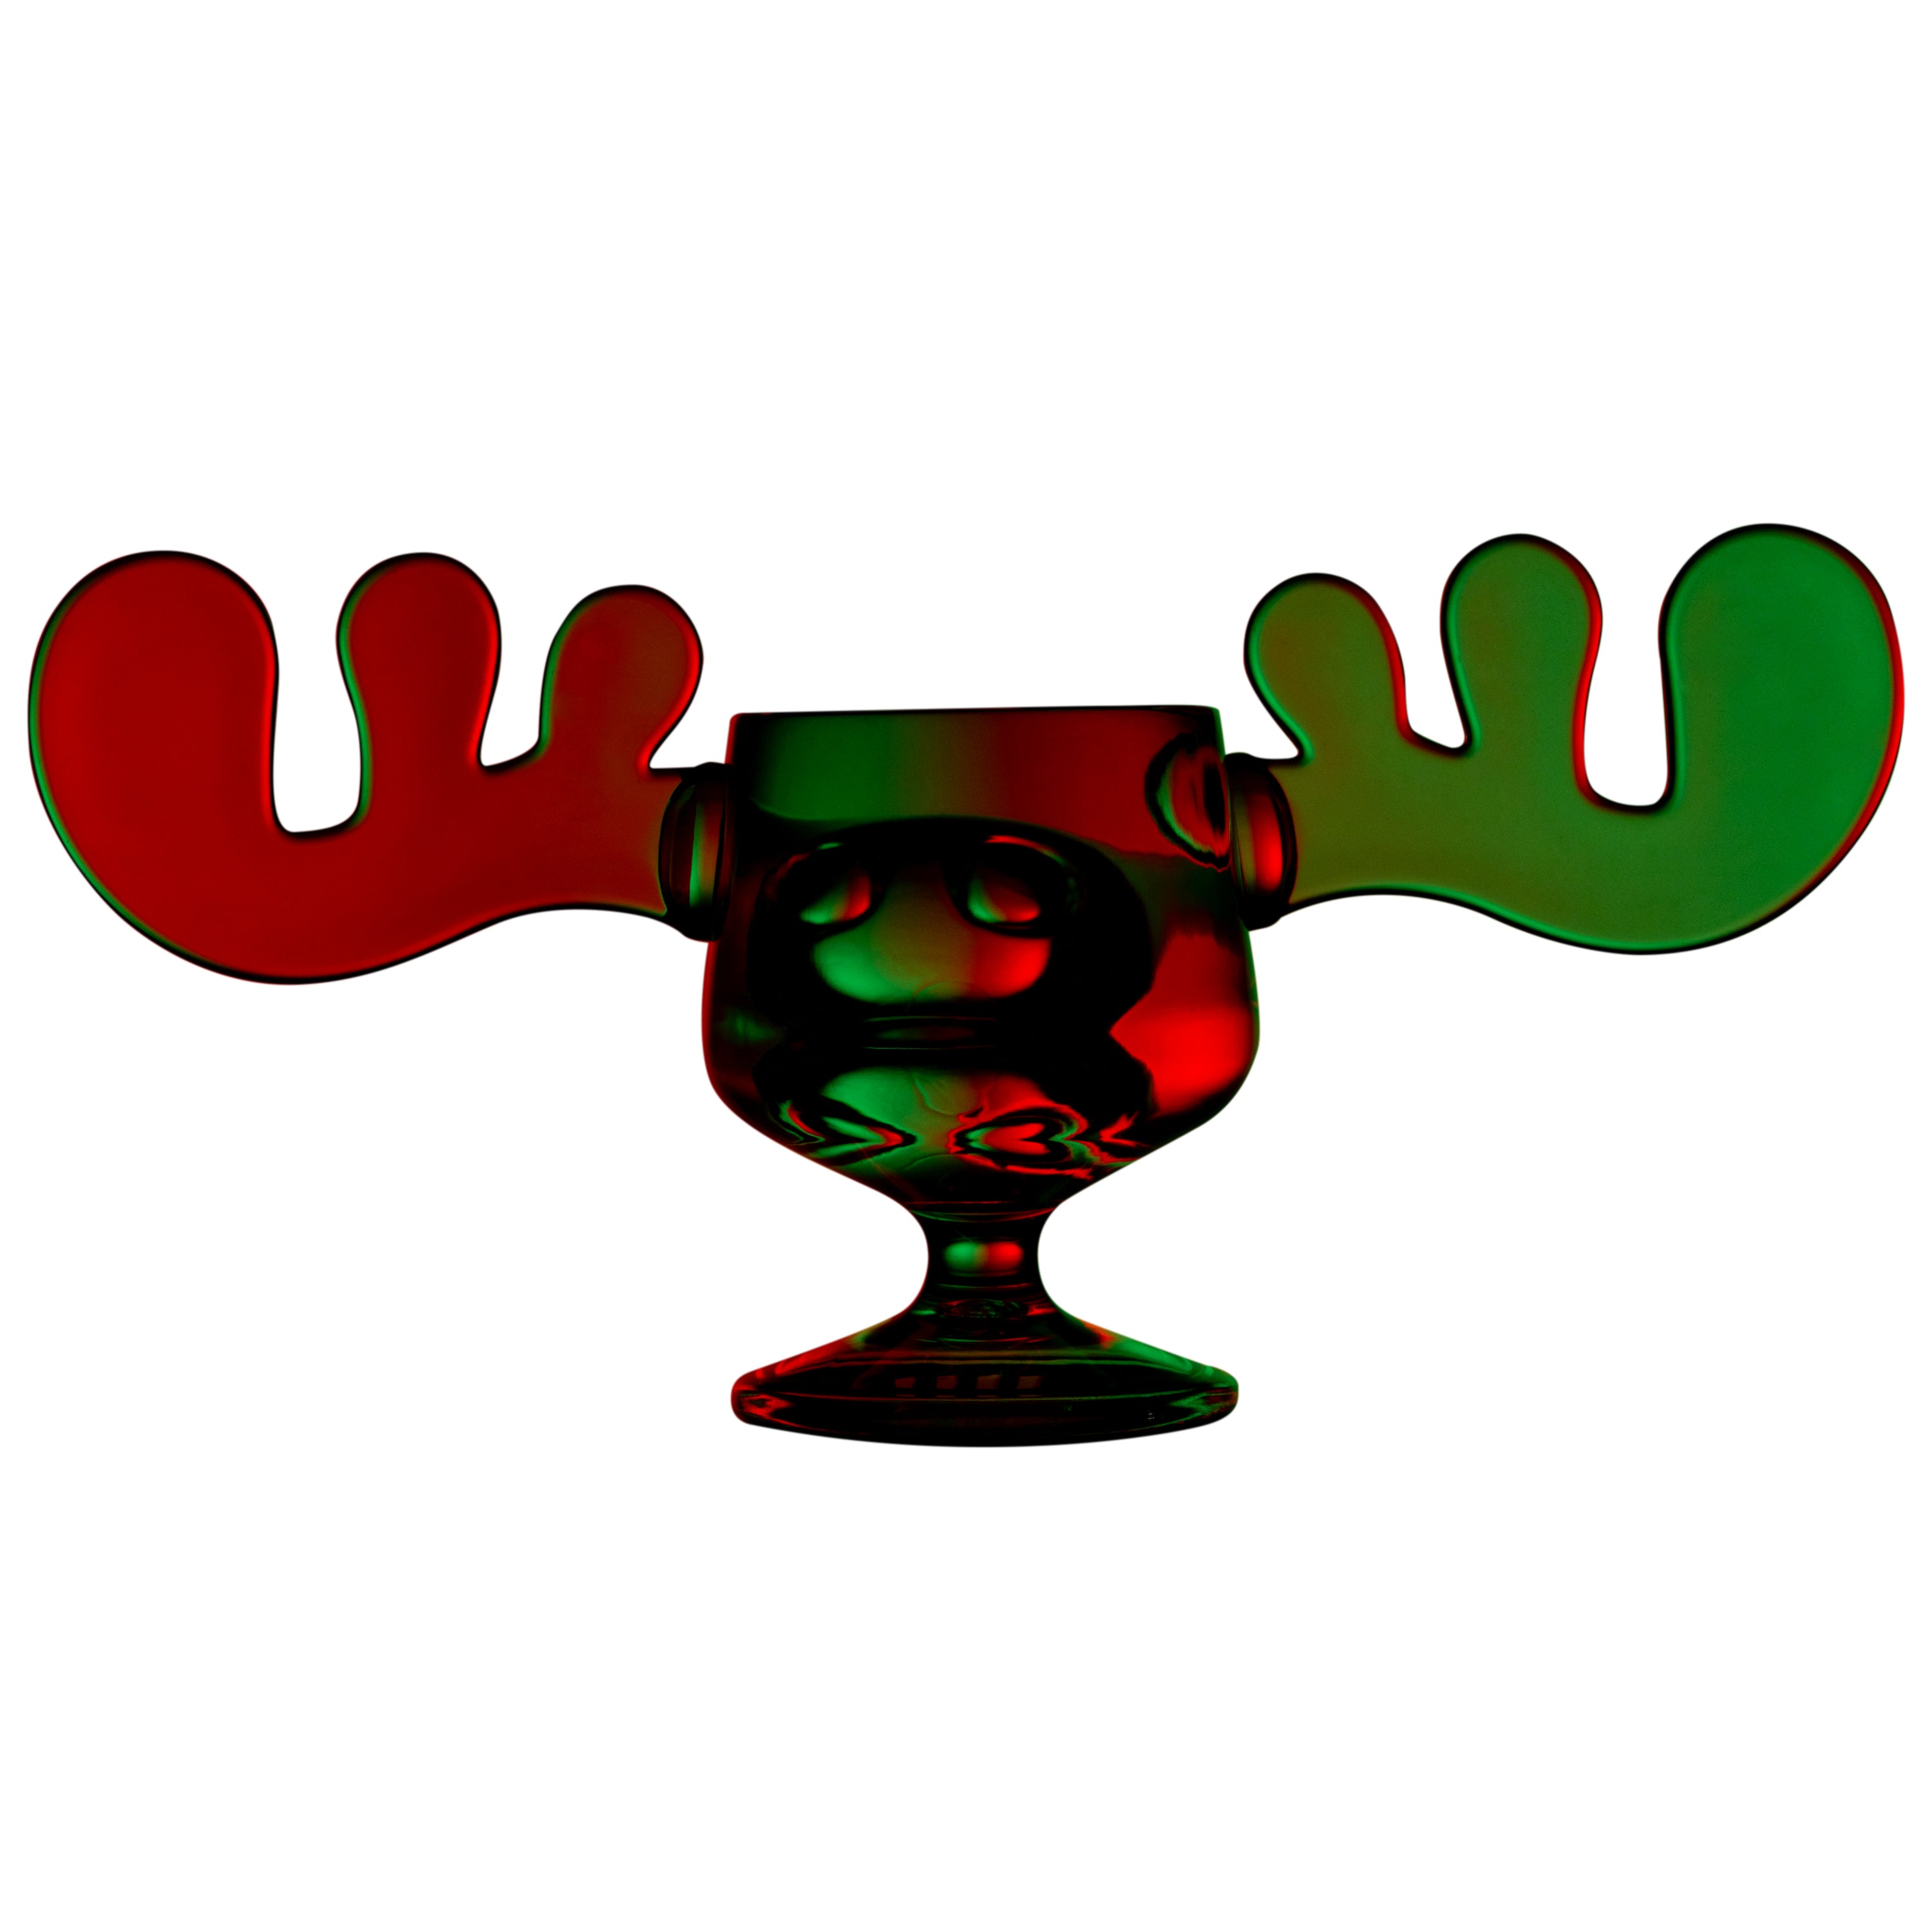 National Lampoon's Christmas Vacation Moose Acrylic Wineglasses, 2-Pack